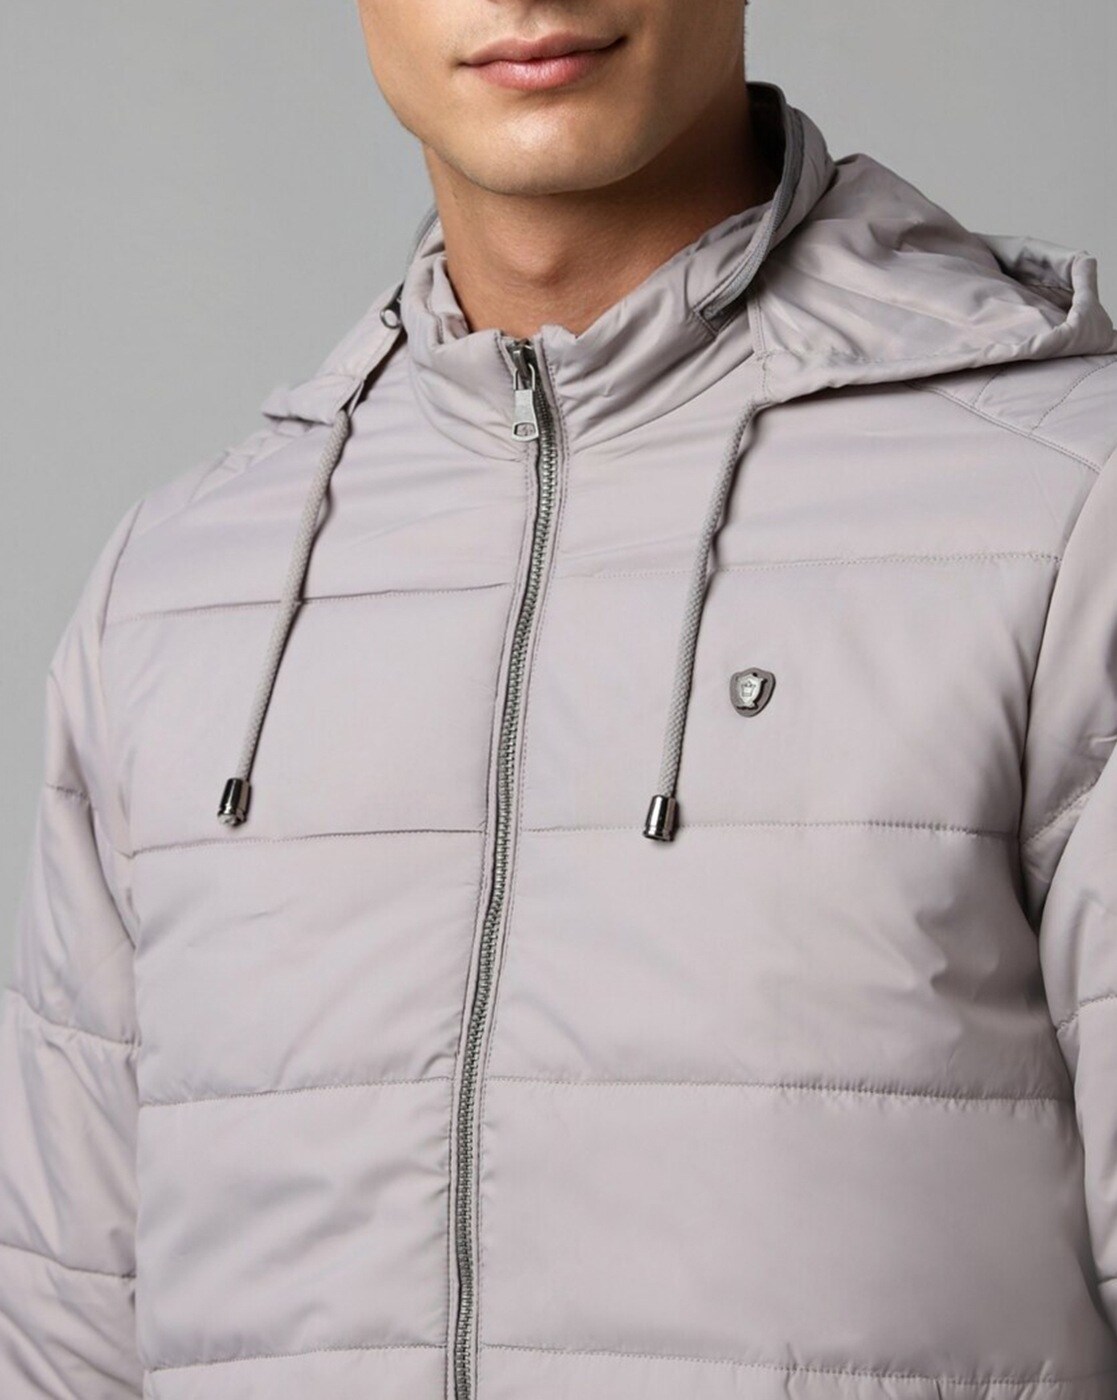 Buy Louis Philippe Yellow Jacket Online - 383511 | Louis Philippe